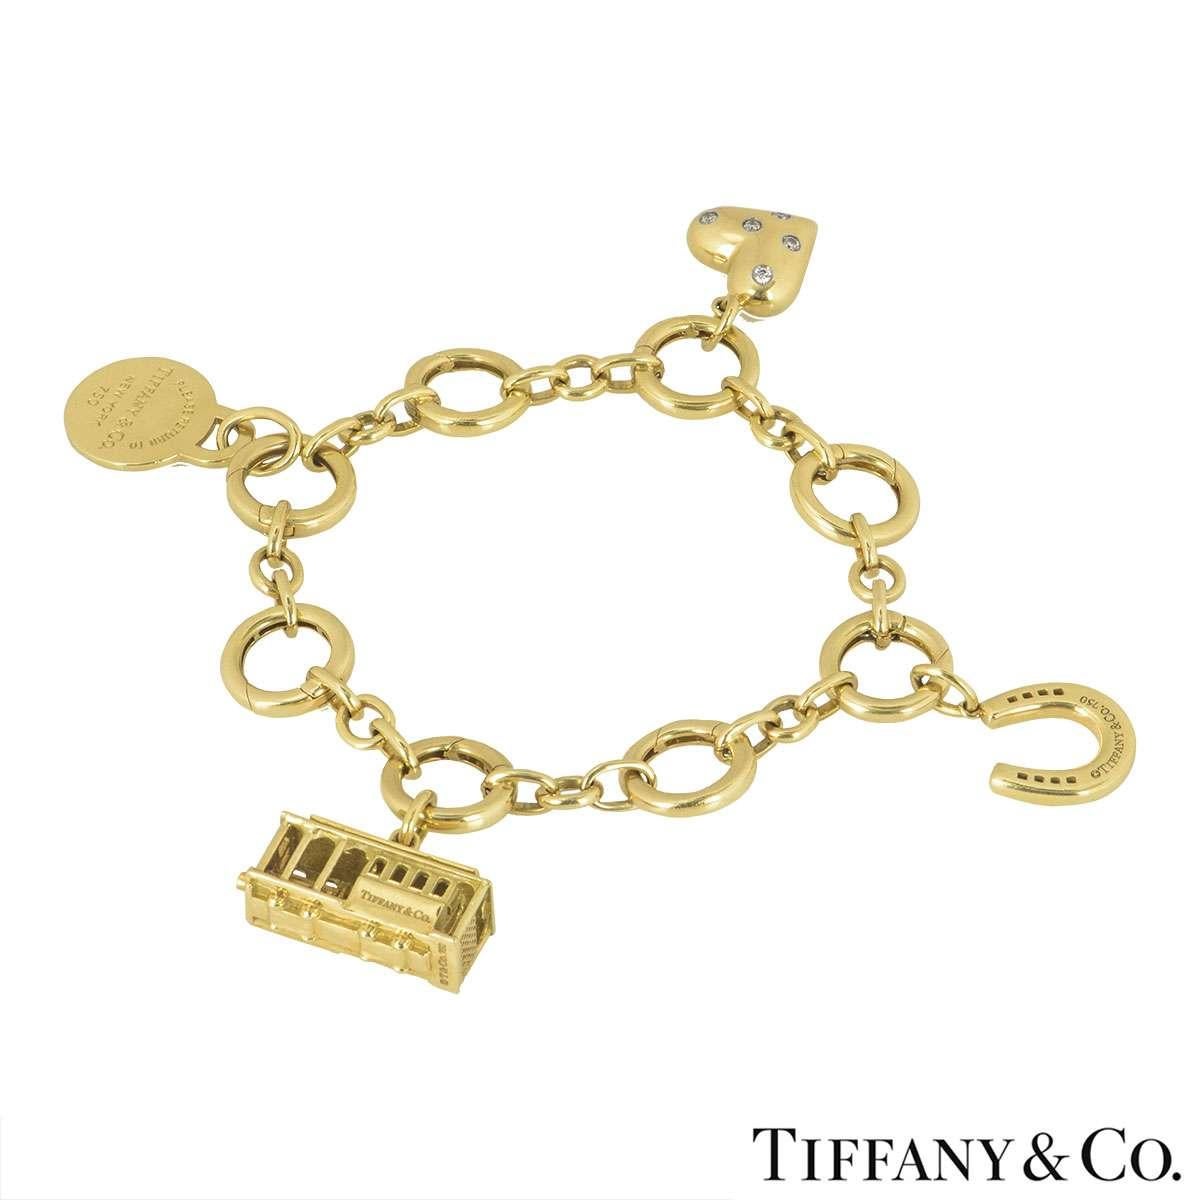 An 18k yellow gold charm bracelet by Tiffany & Co. The bracelet has 4 charms which consist of a diamond heart, a horseshoe, a tram and a Return to Tiffany & Co motif. The bracelet is made up of circular links, each featuring a push spring clasp